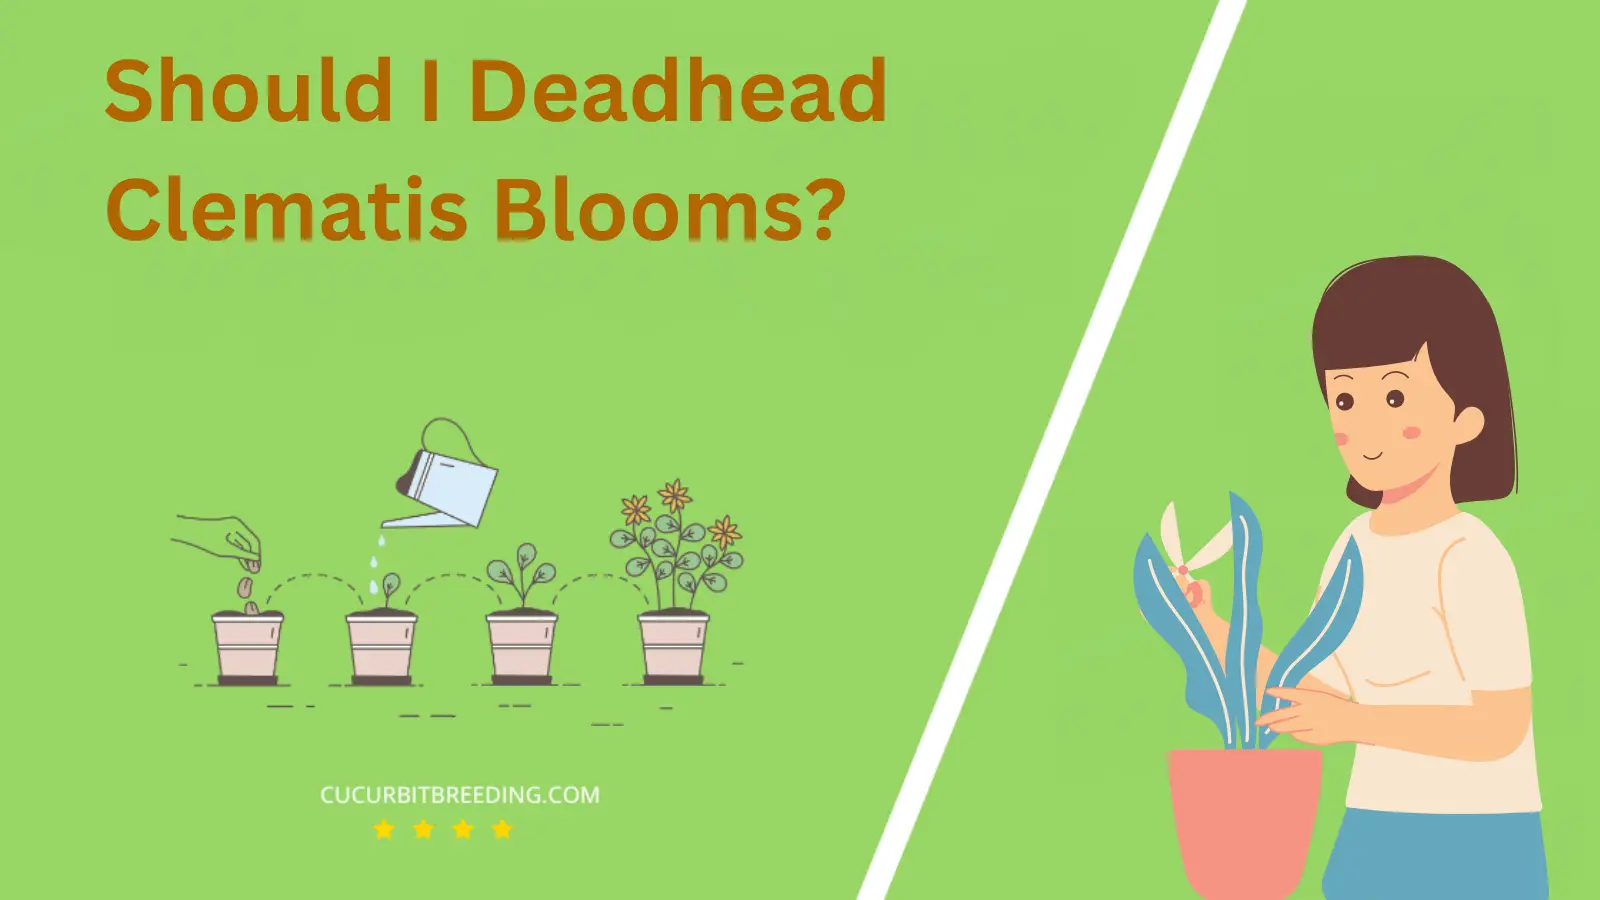 Should I Deadhead Clematis Blooms?